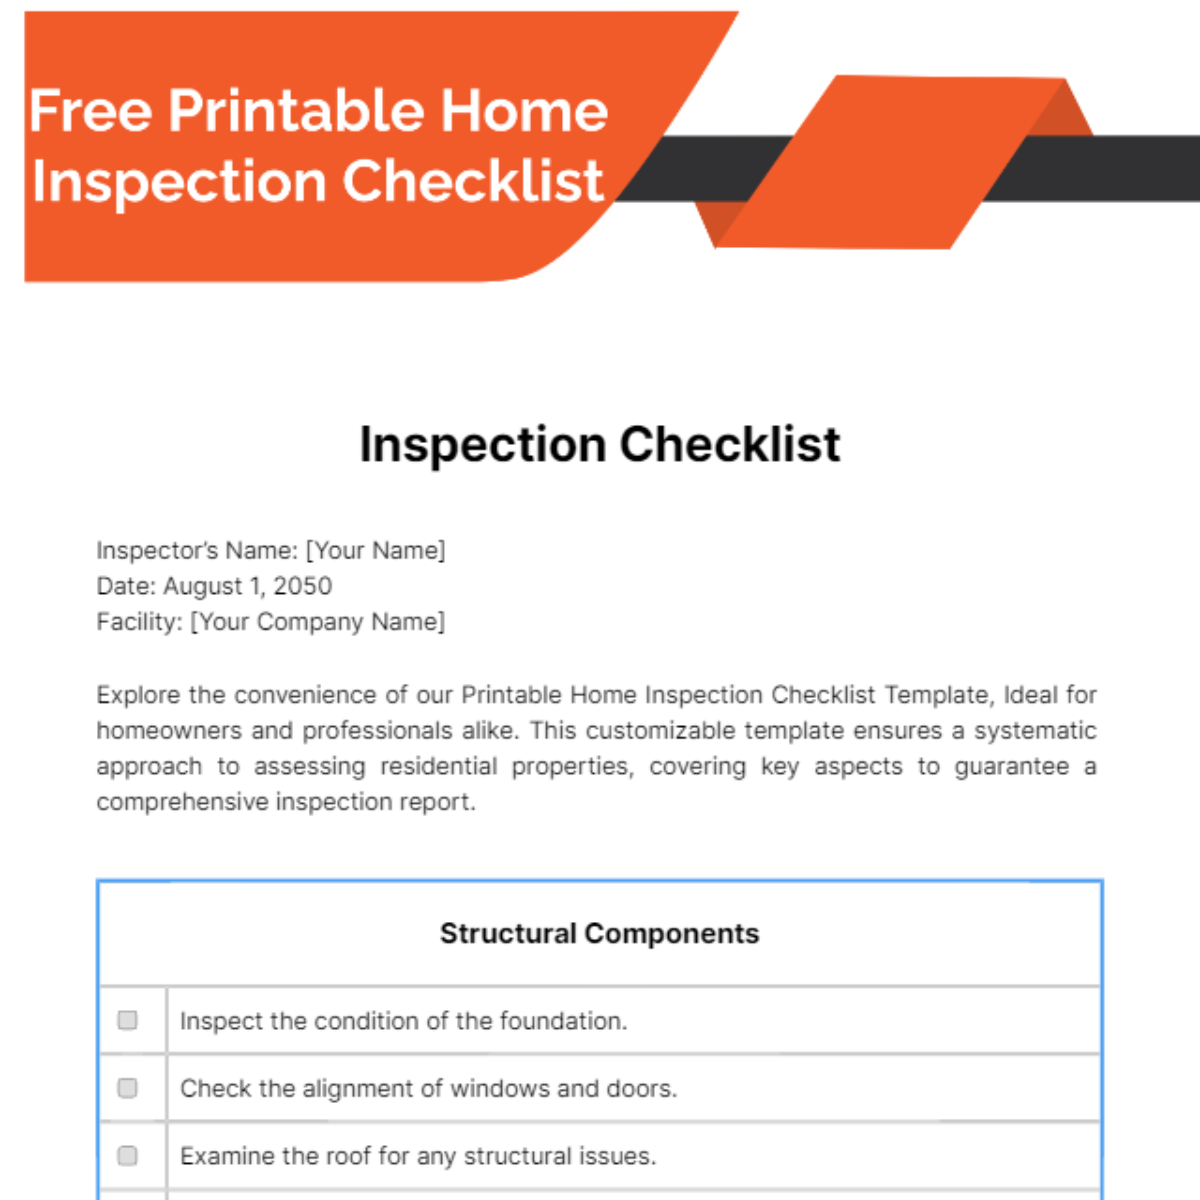 Free Printable Home Inspection Checklist Template